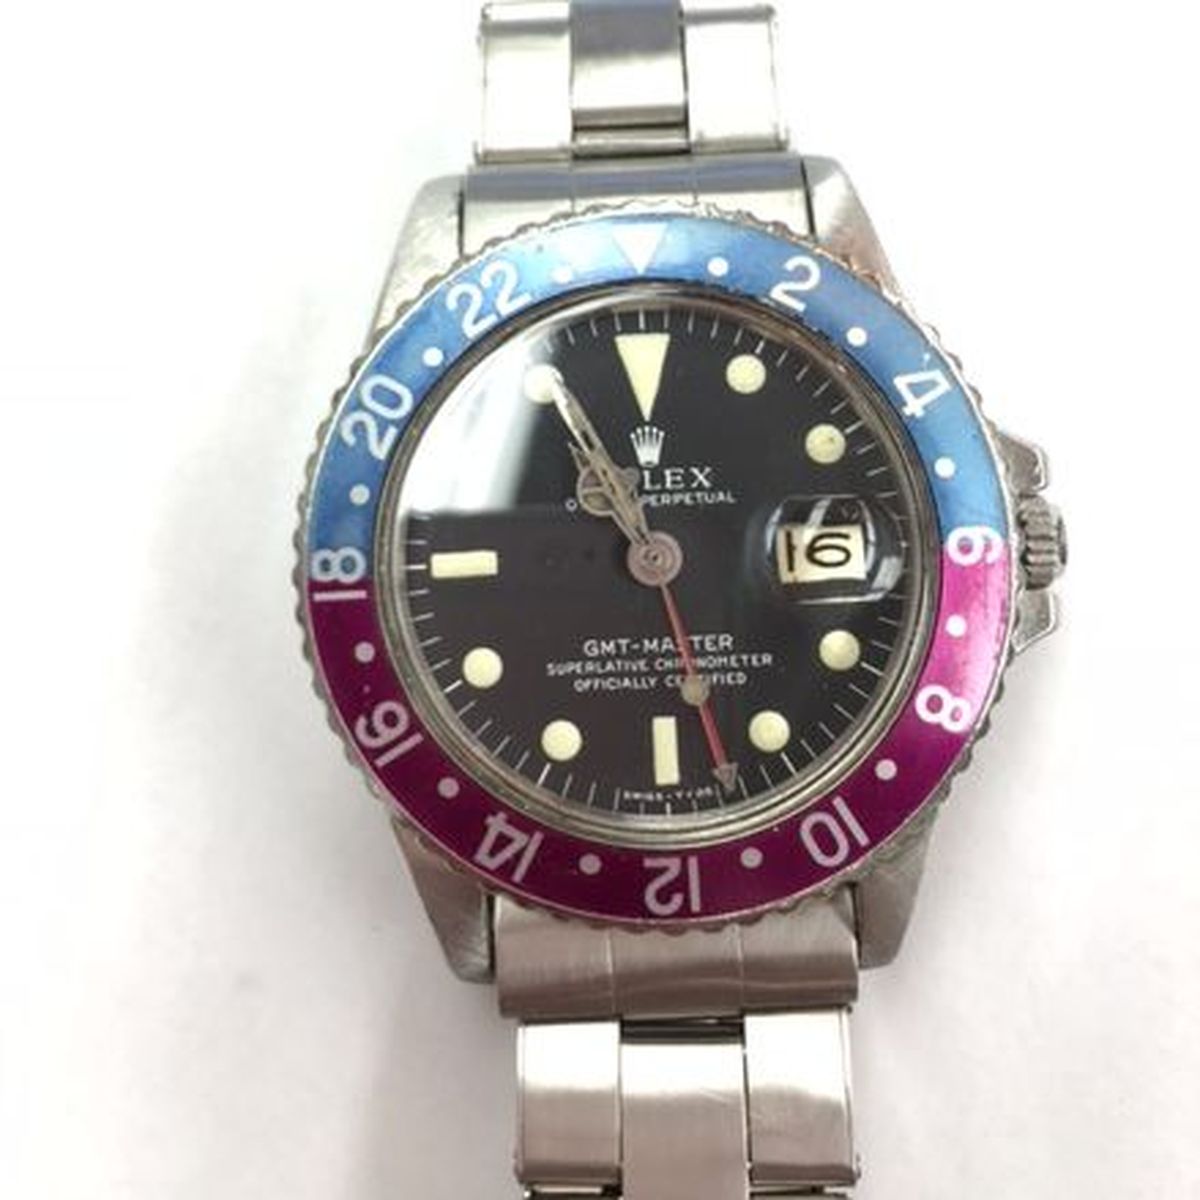 Give Your Rolex an Overhaul